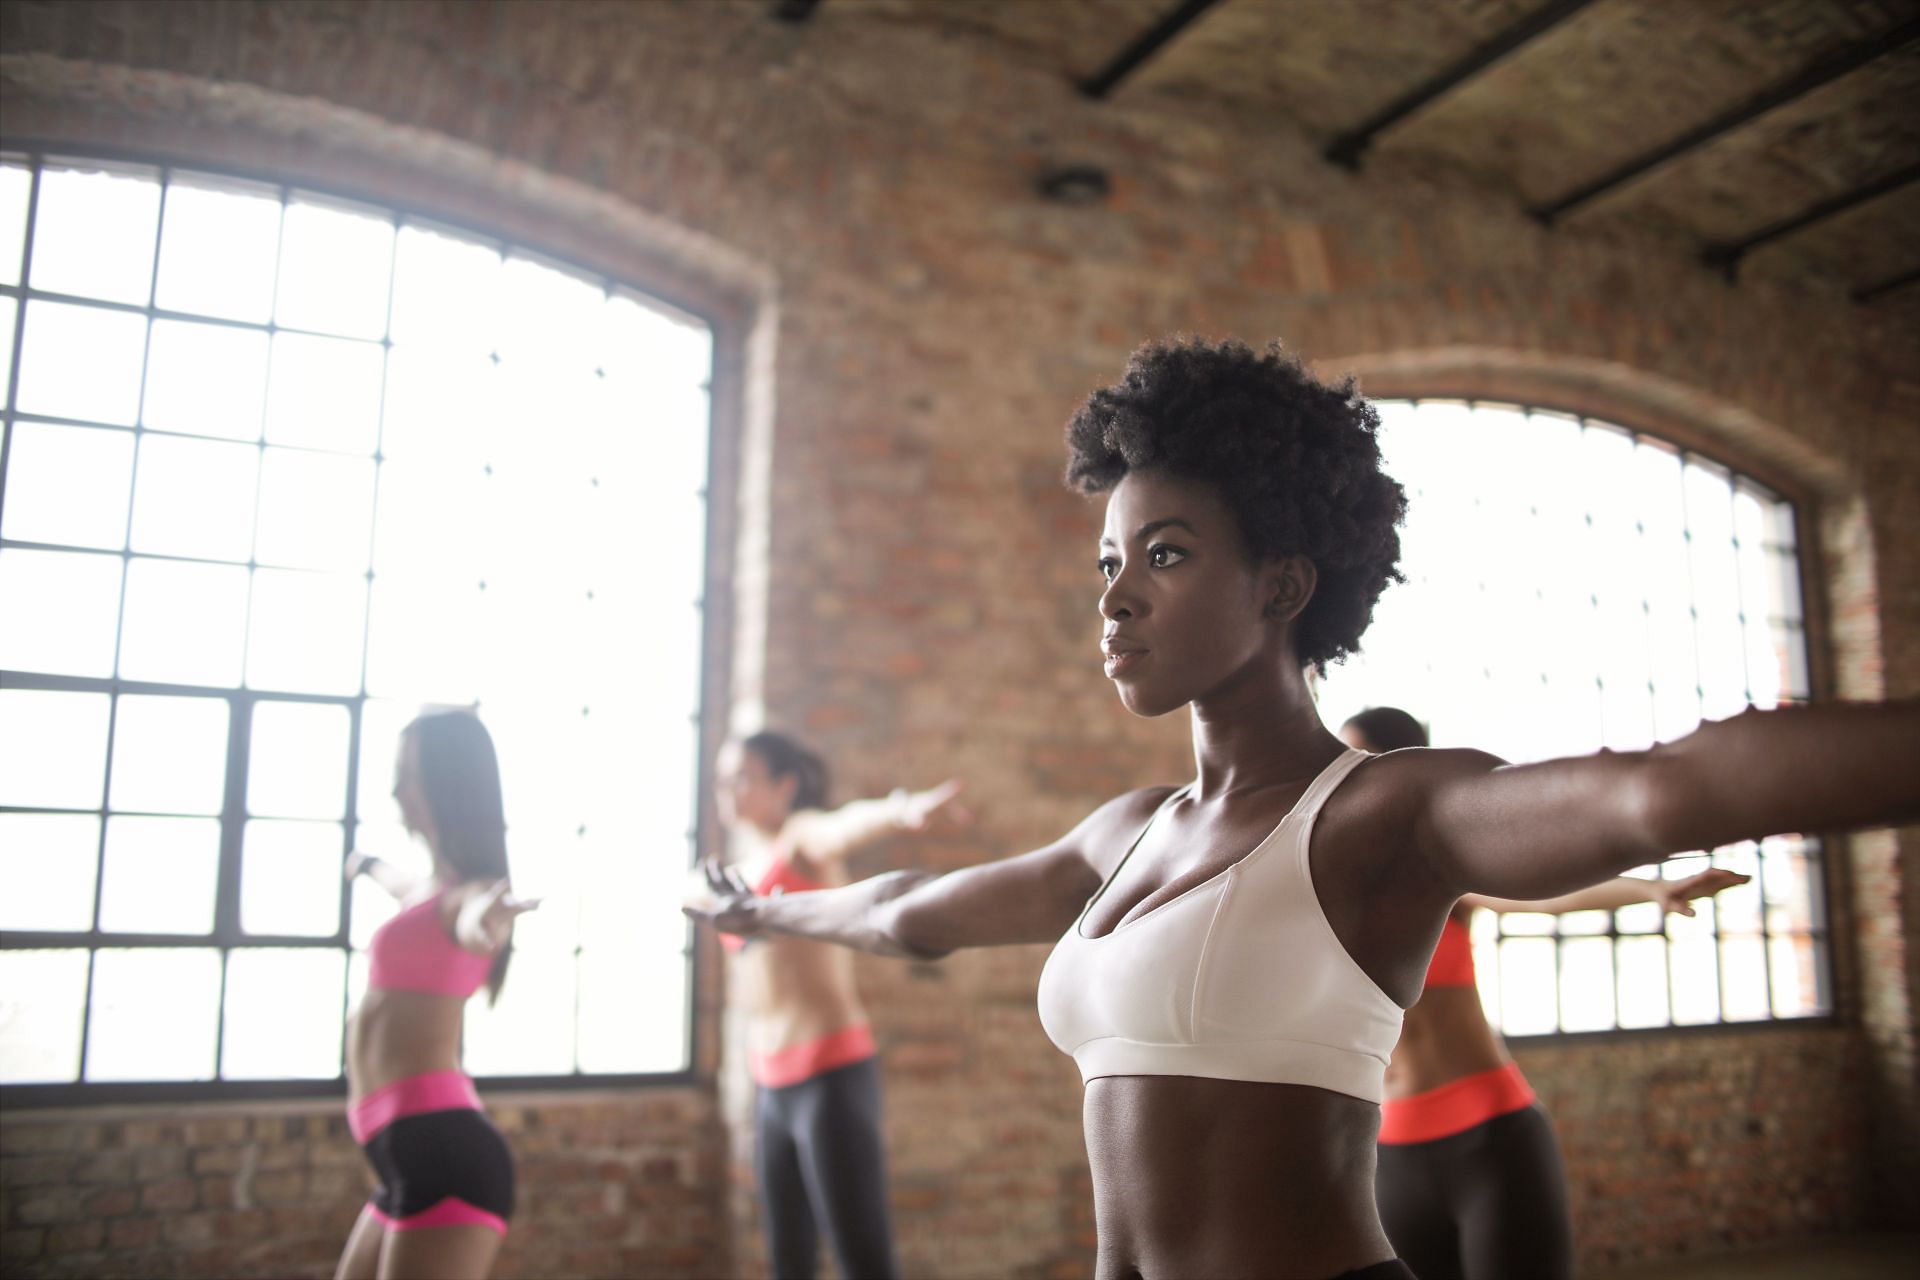 Warming up before weight training is crucial for muscles (Image via pexels/Andrea Piacquadio)